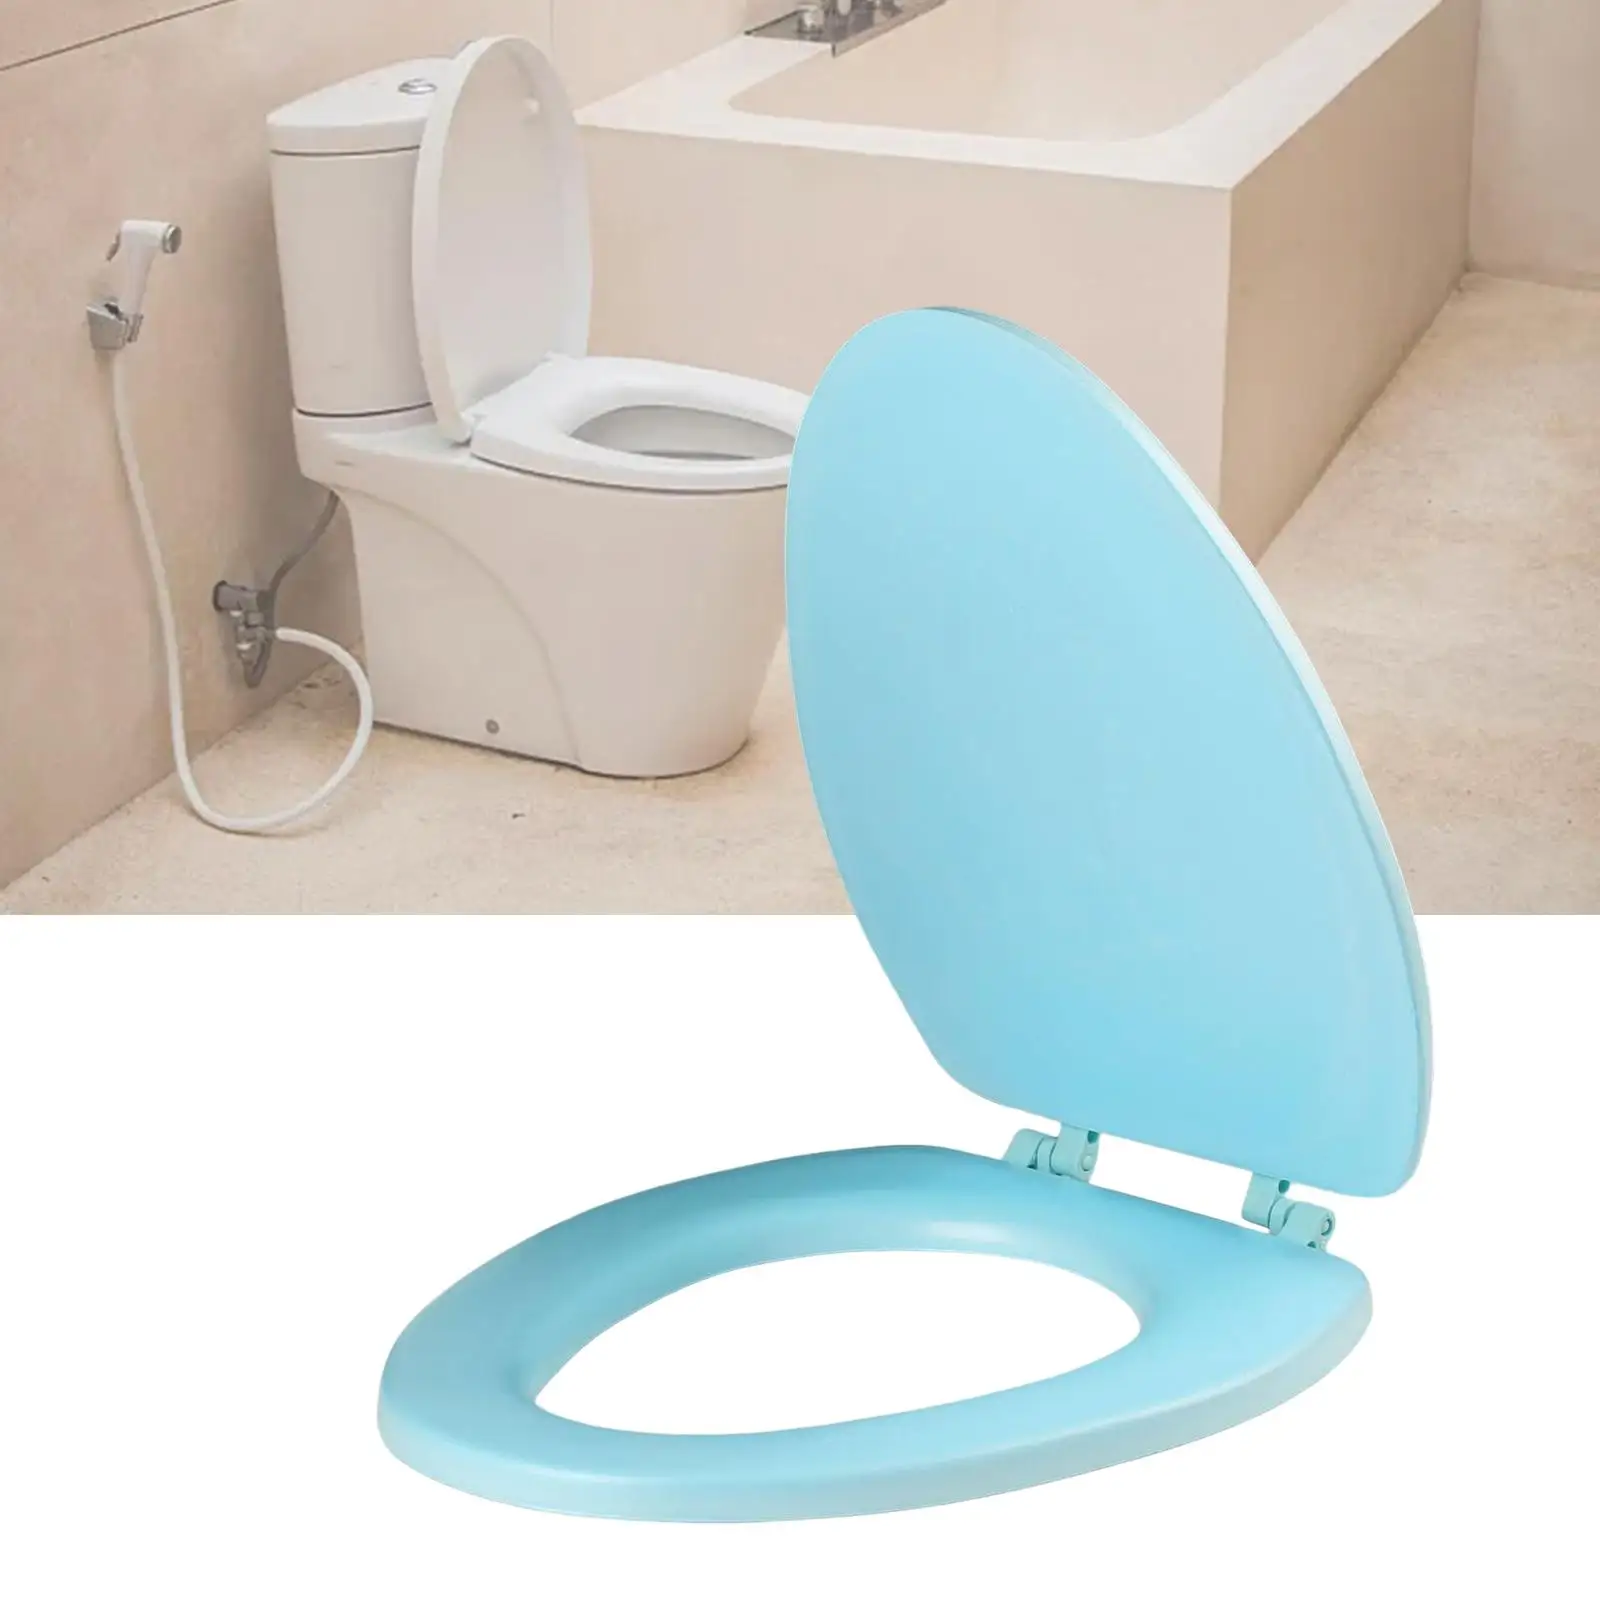 Toilet Cover Cushion and Lid Waterproof Easily Clean and Install Accessory Convenient